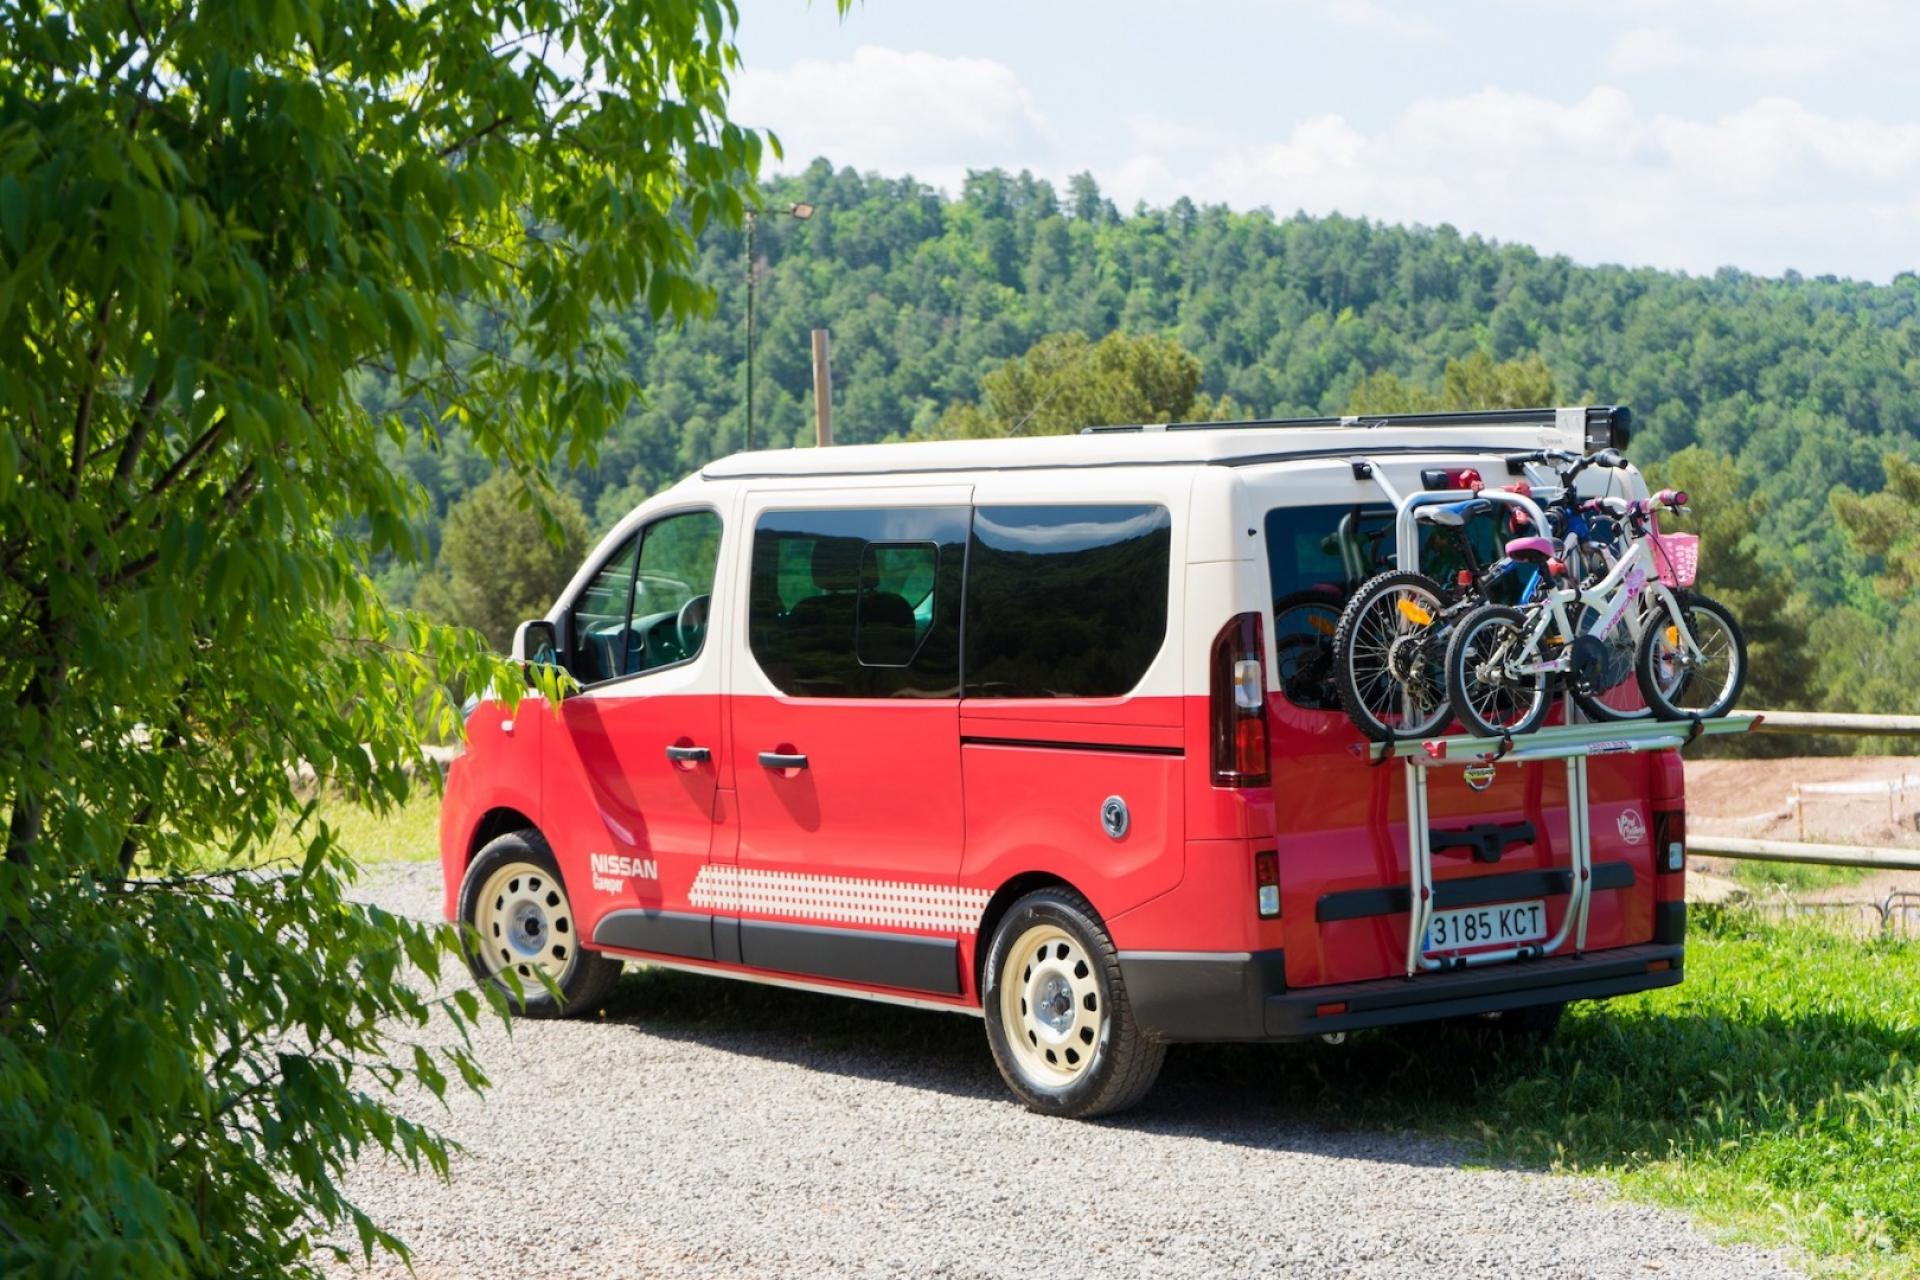 Nissan camper motor show madryt hellocamping news